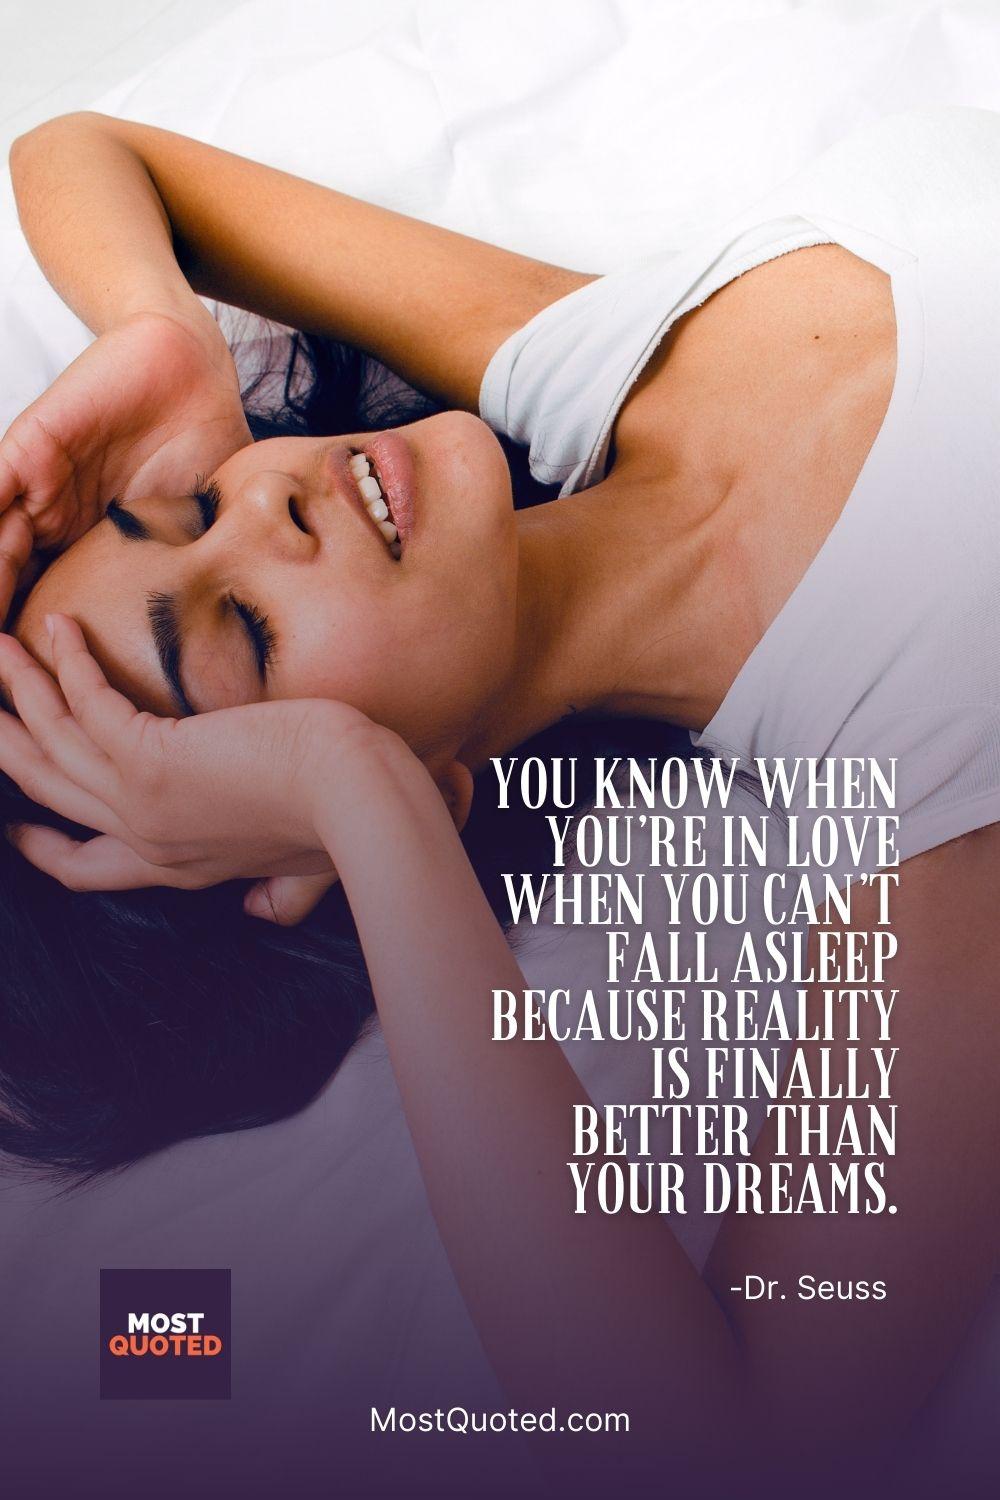 You know when you’re in love when you can’t fall asleep because reality is finally better than your dreams. - Dr. Seuss